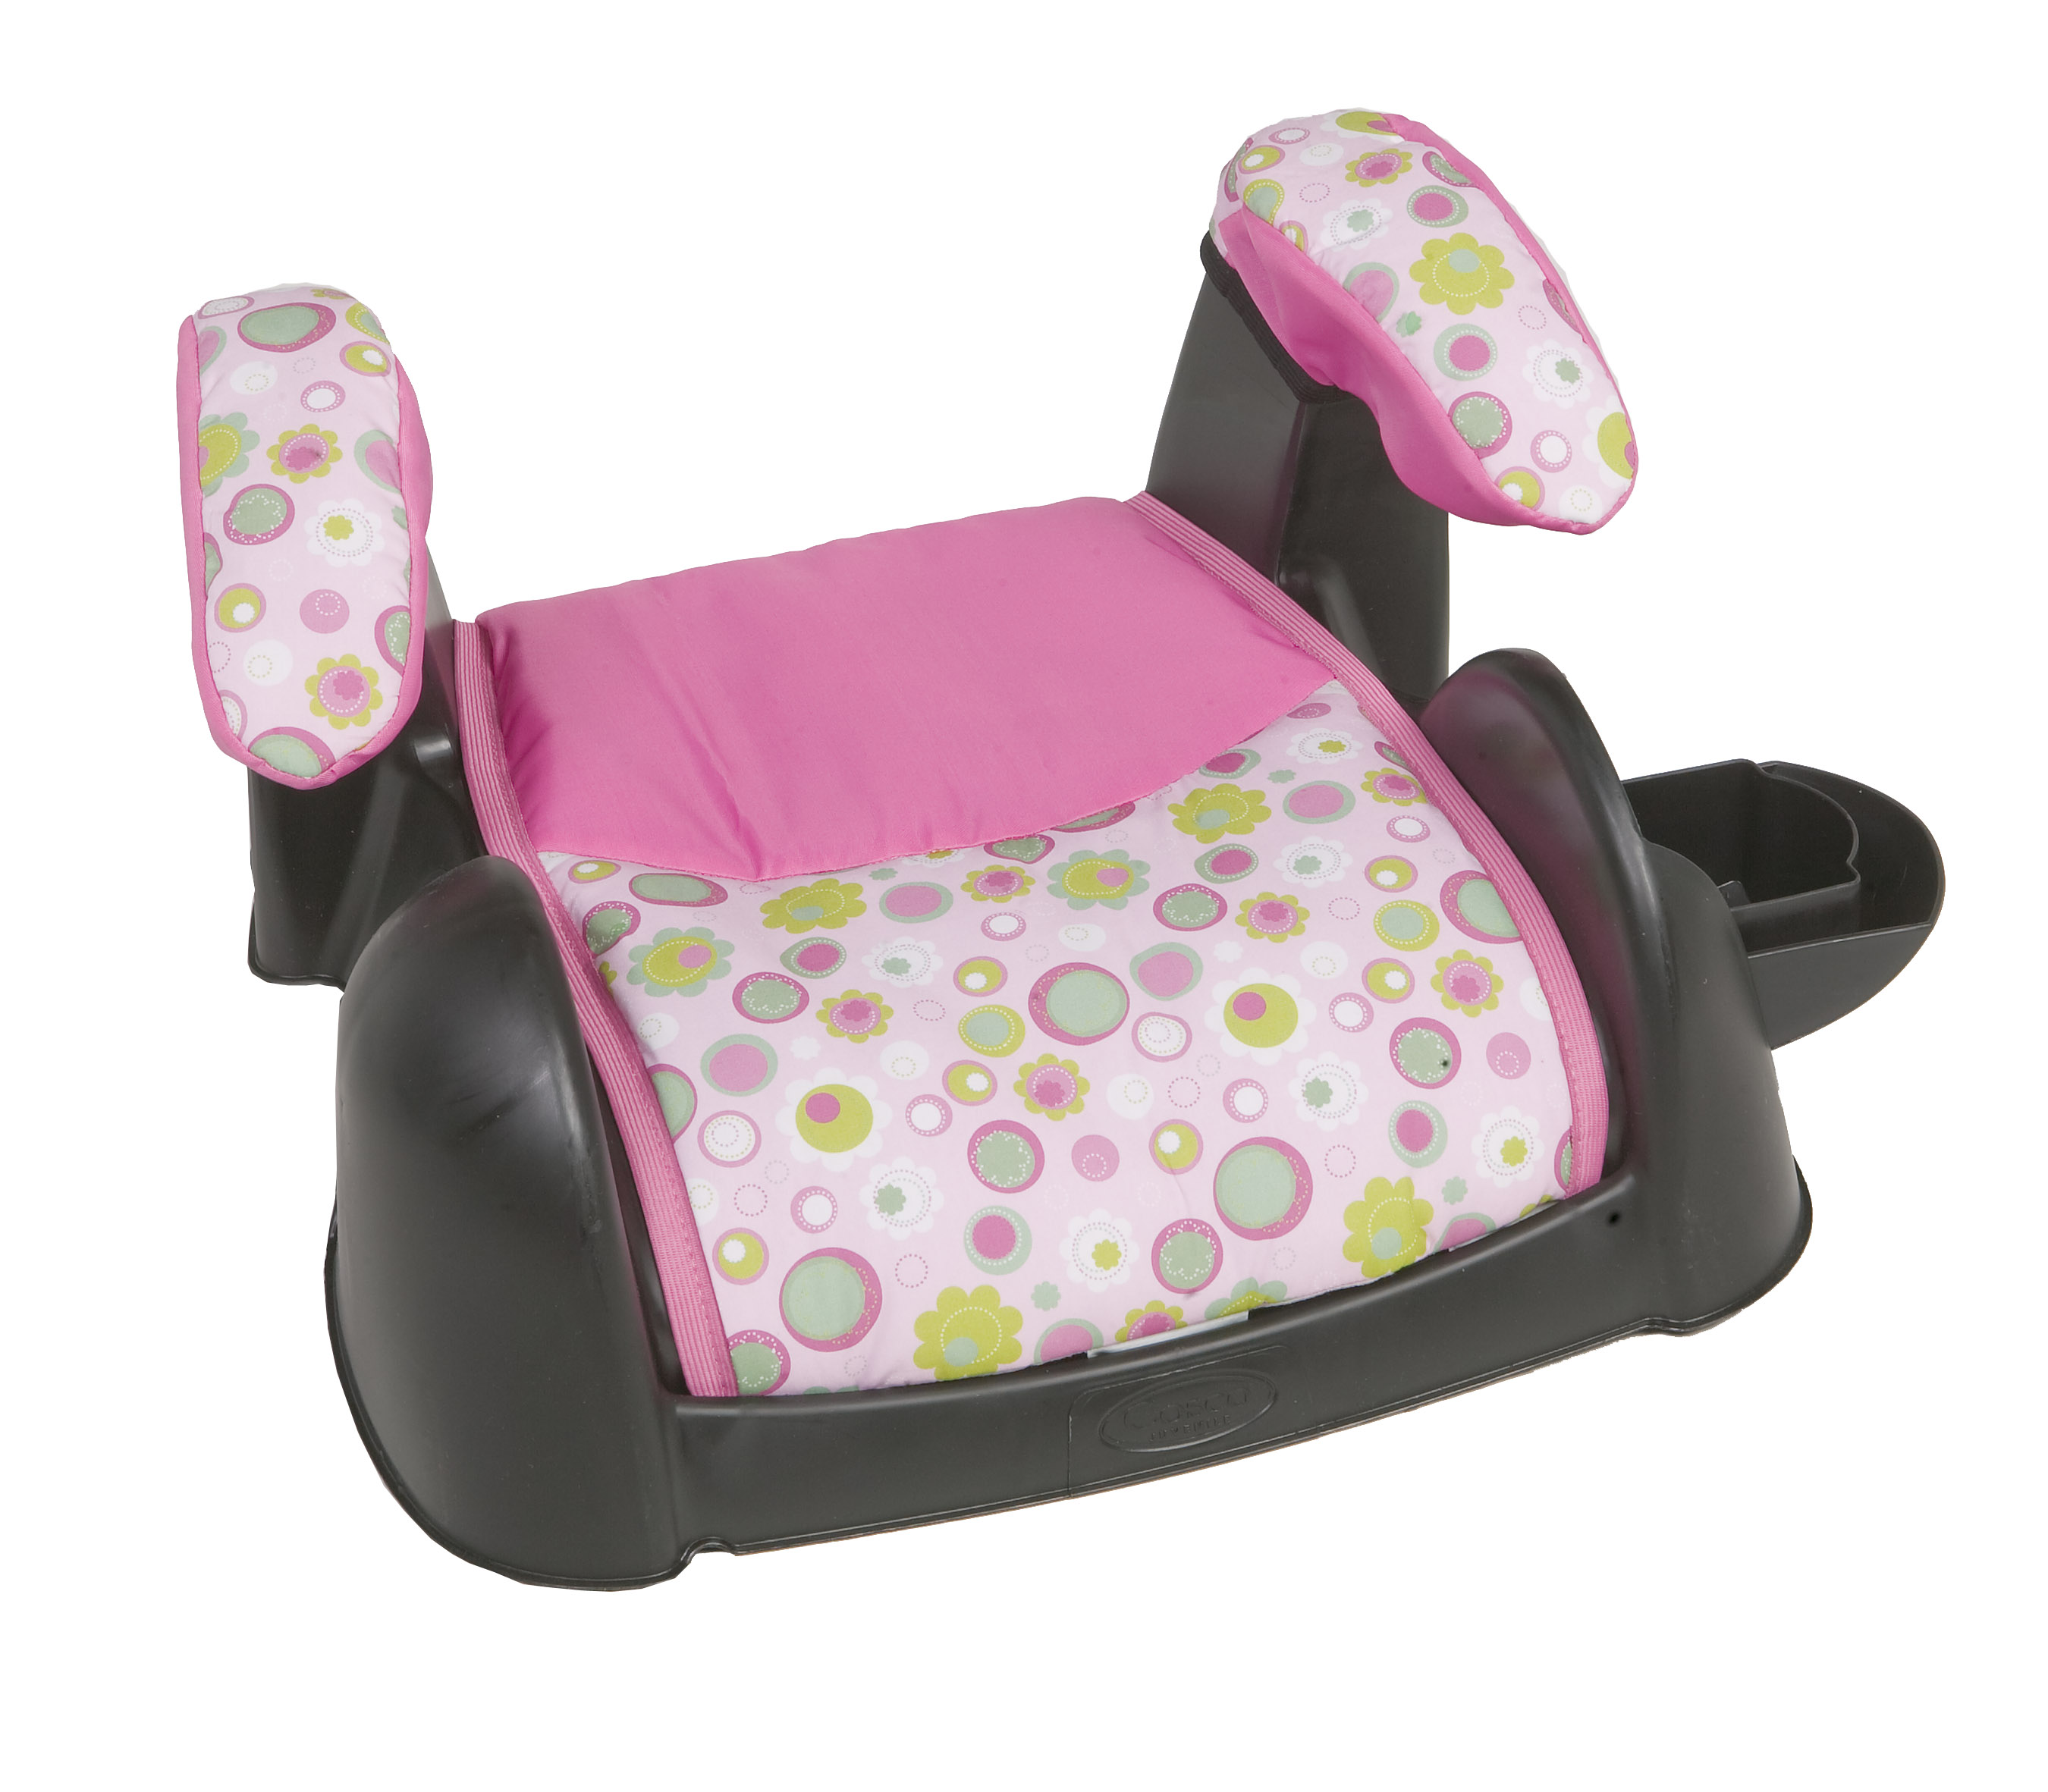 Cosco Ambassador Backless Booster Car Seat, Magical Moonlight - image 3 of 3